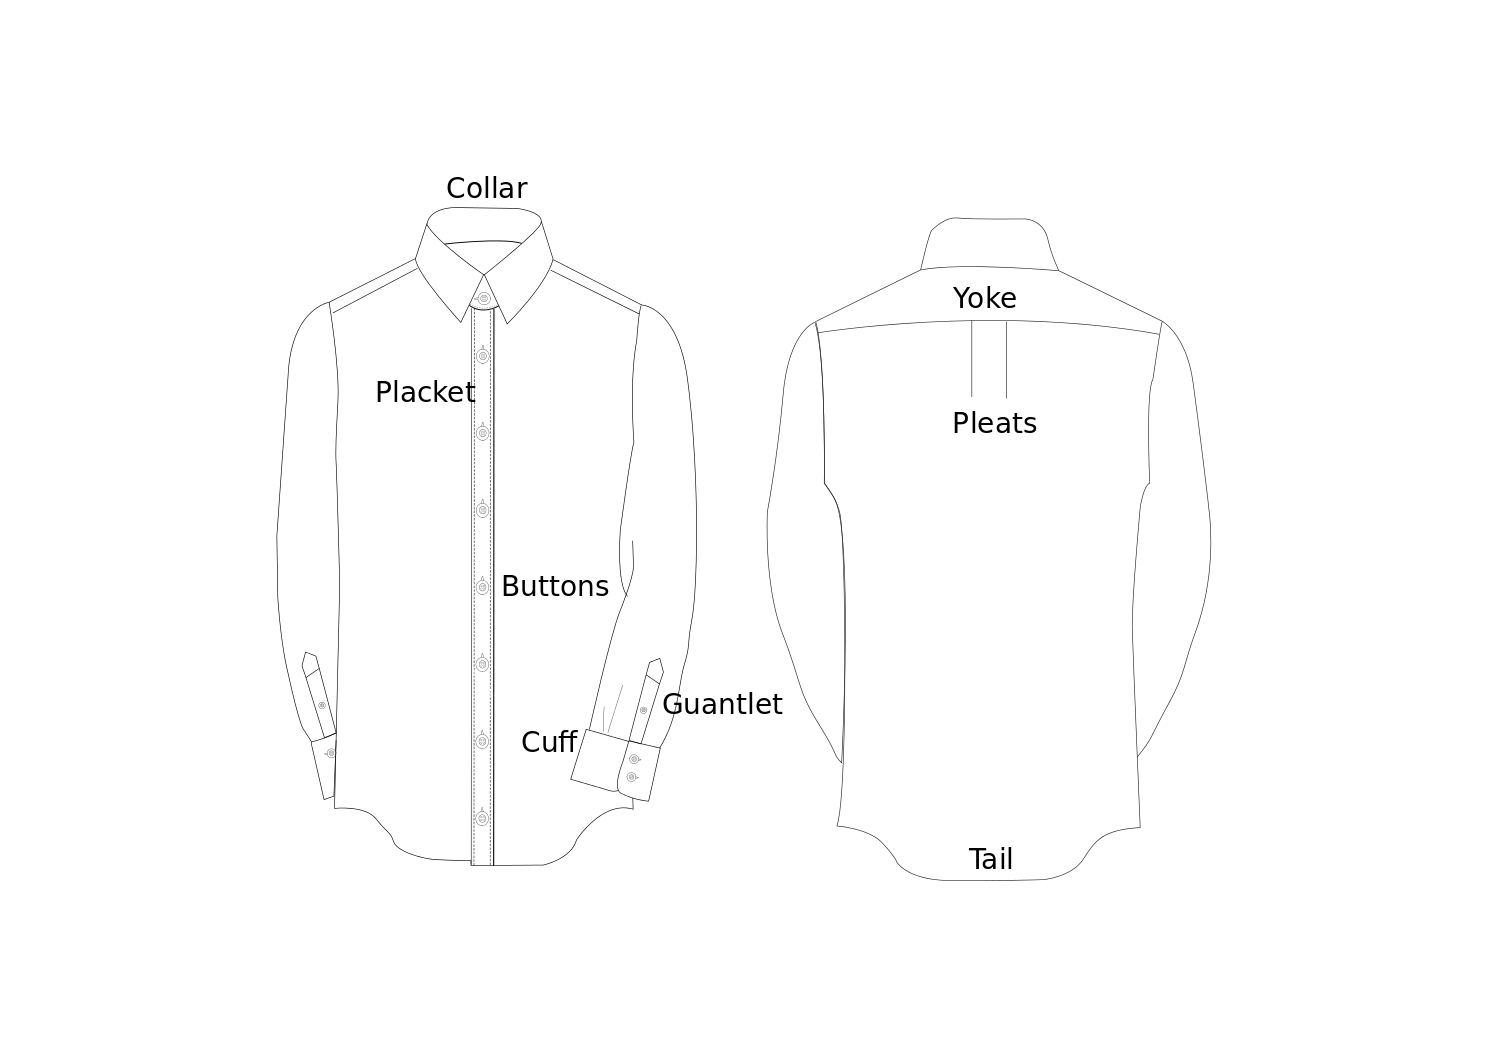 Download File:Dress Shirt Features.svg - Wikimedia Commons